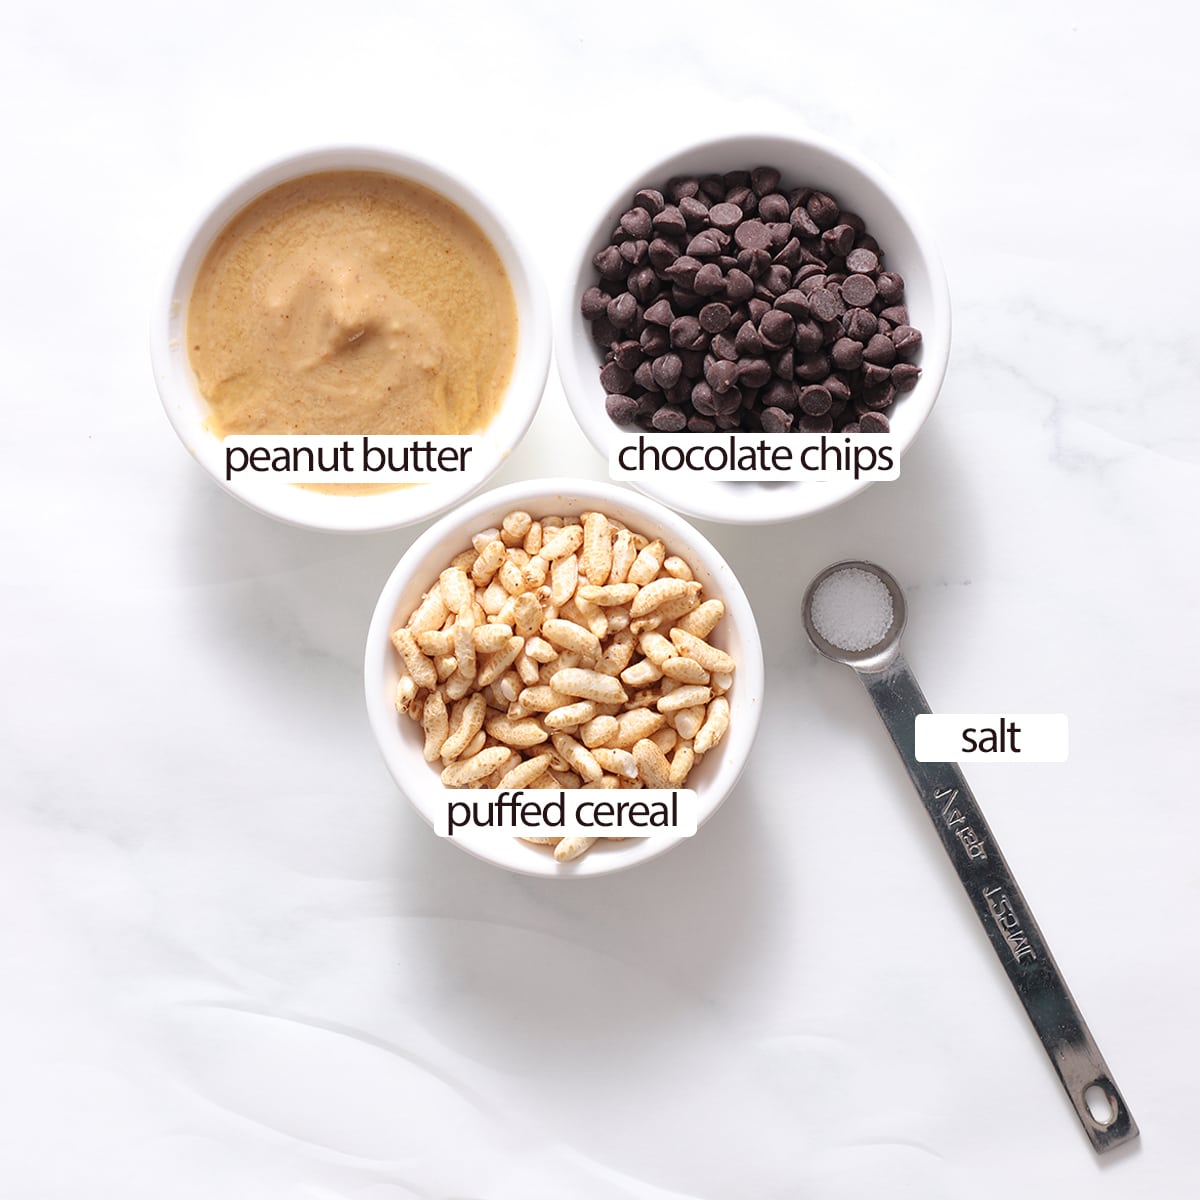 ingredients for crunch bars.